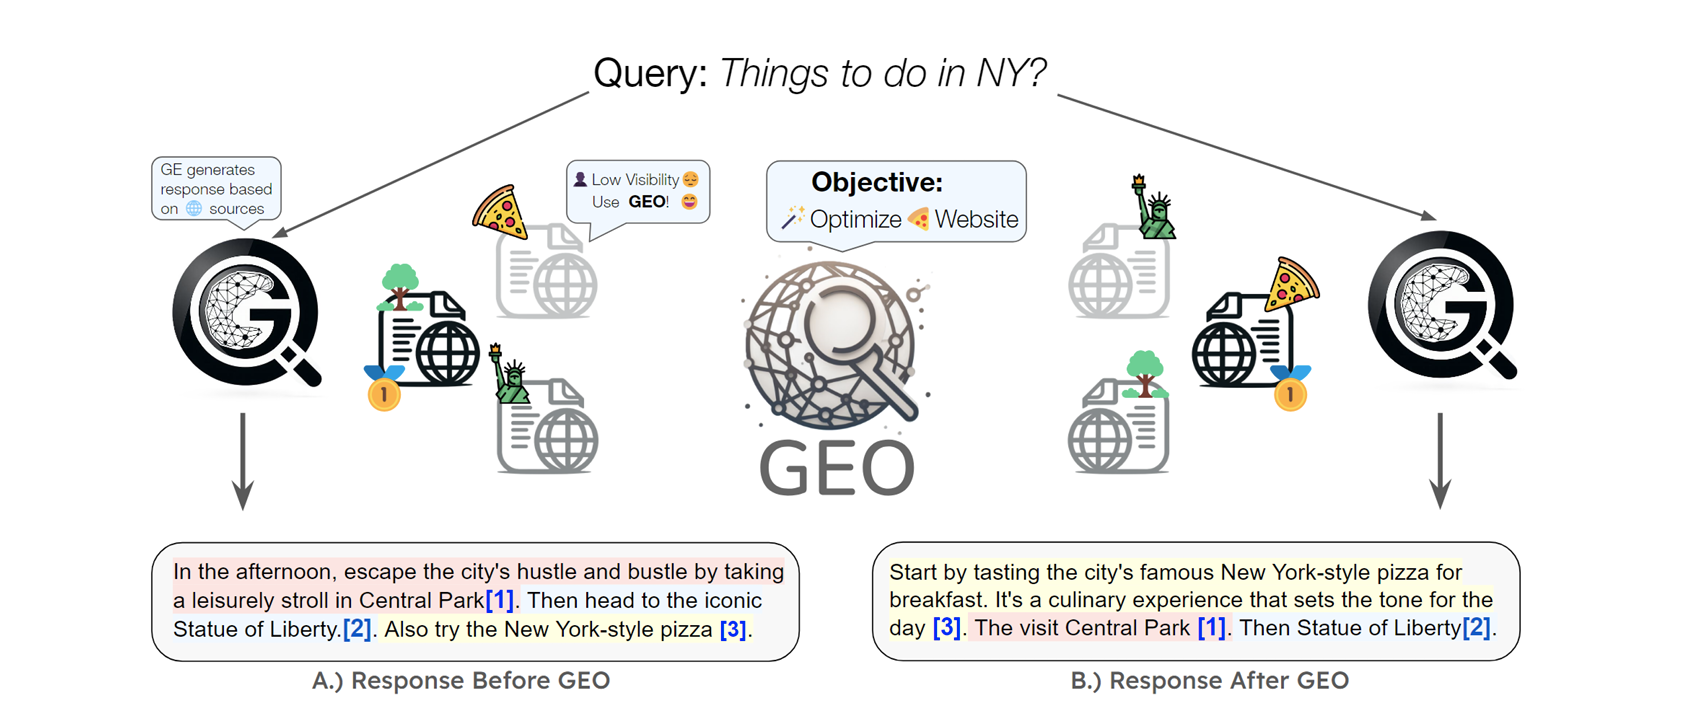 Outline of the GEO process for a specific query